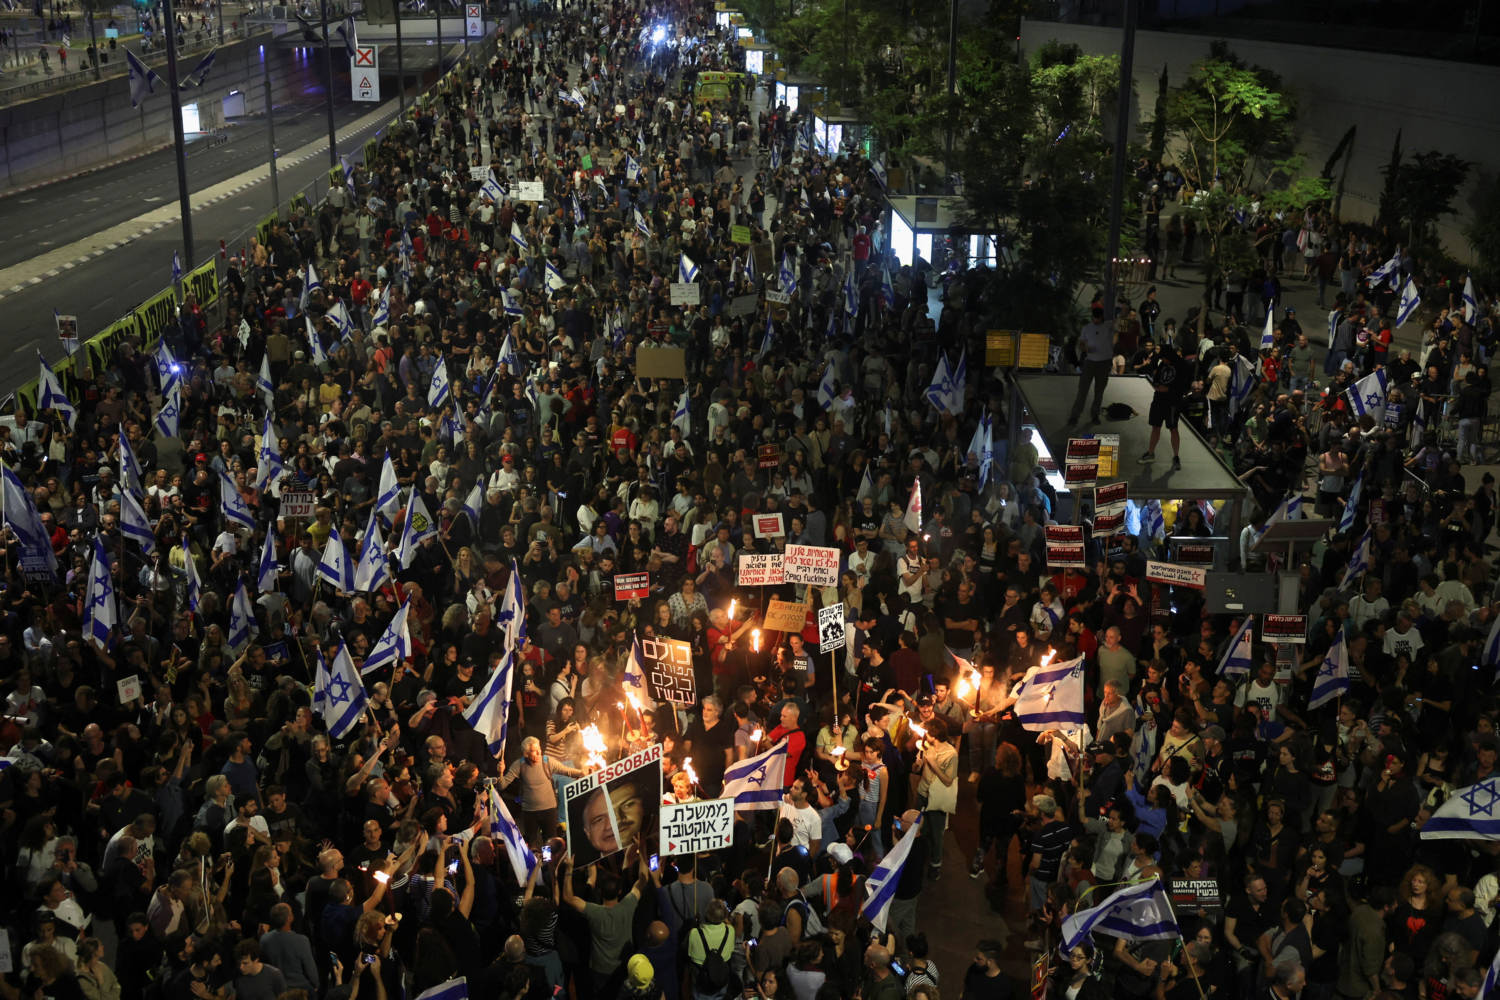 People Attend A Protest Calling For The Immediate Release Of Hostages, In Tel Aviv